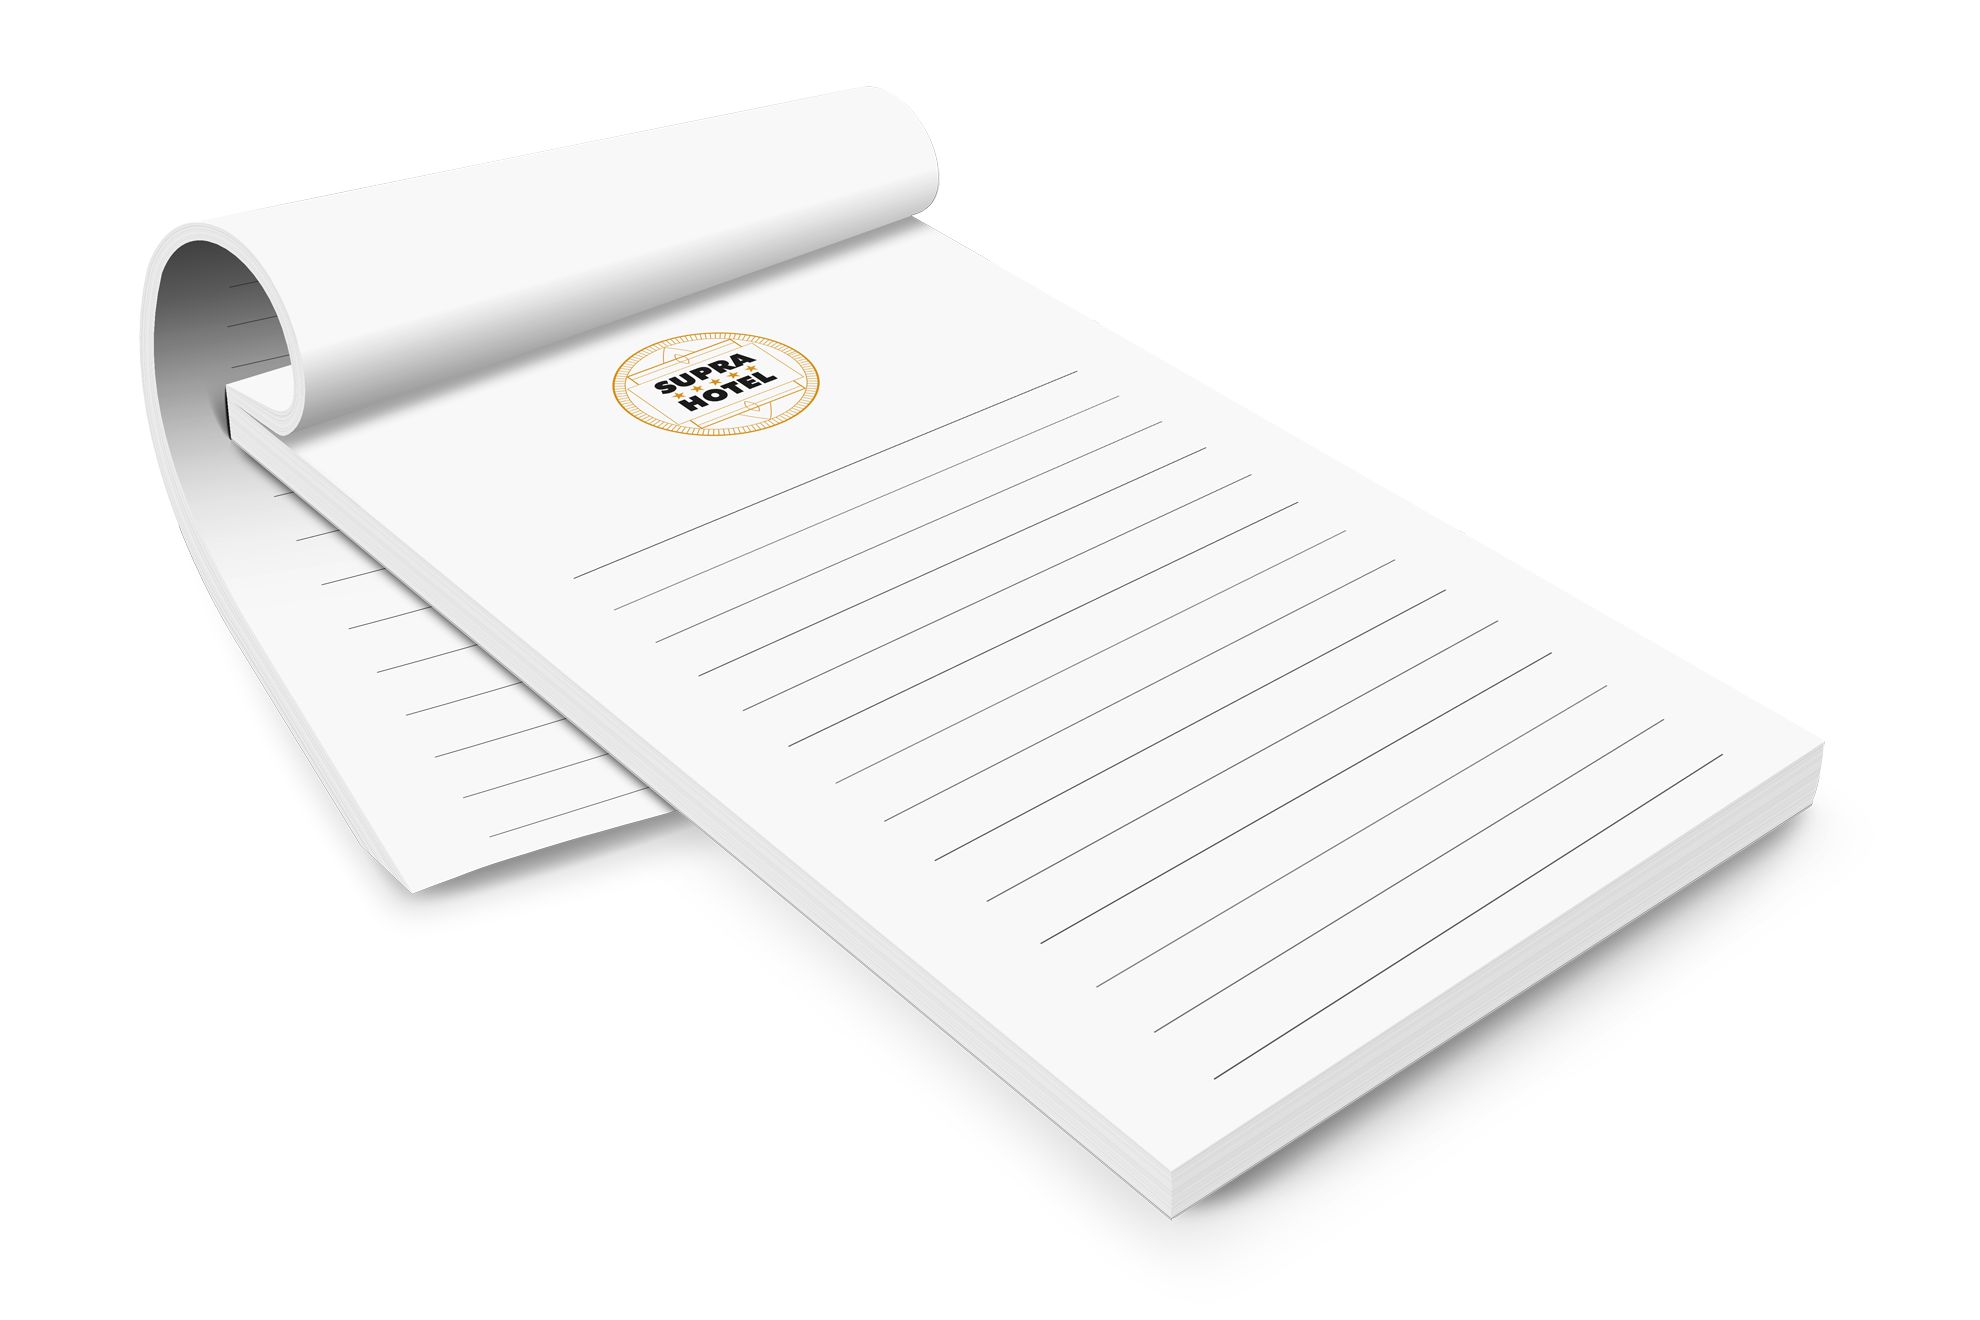 Customized Notebooks: Print Online and Save Money!: Print online your restaurant or hotel notebooks. Choose the convenience of a high quality online printing press.